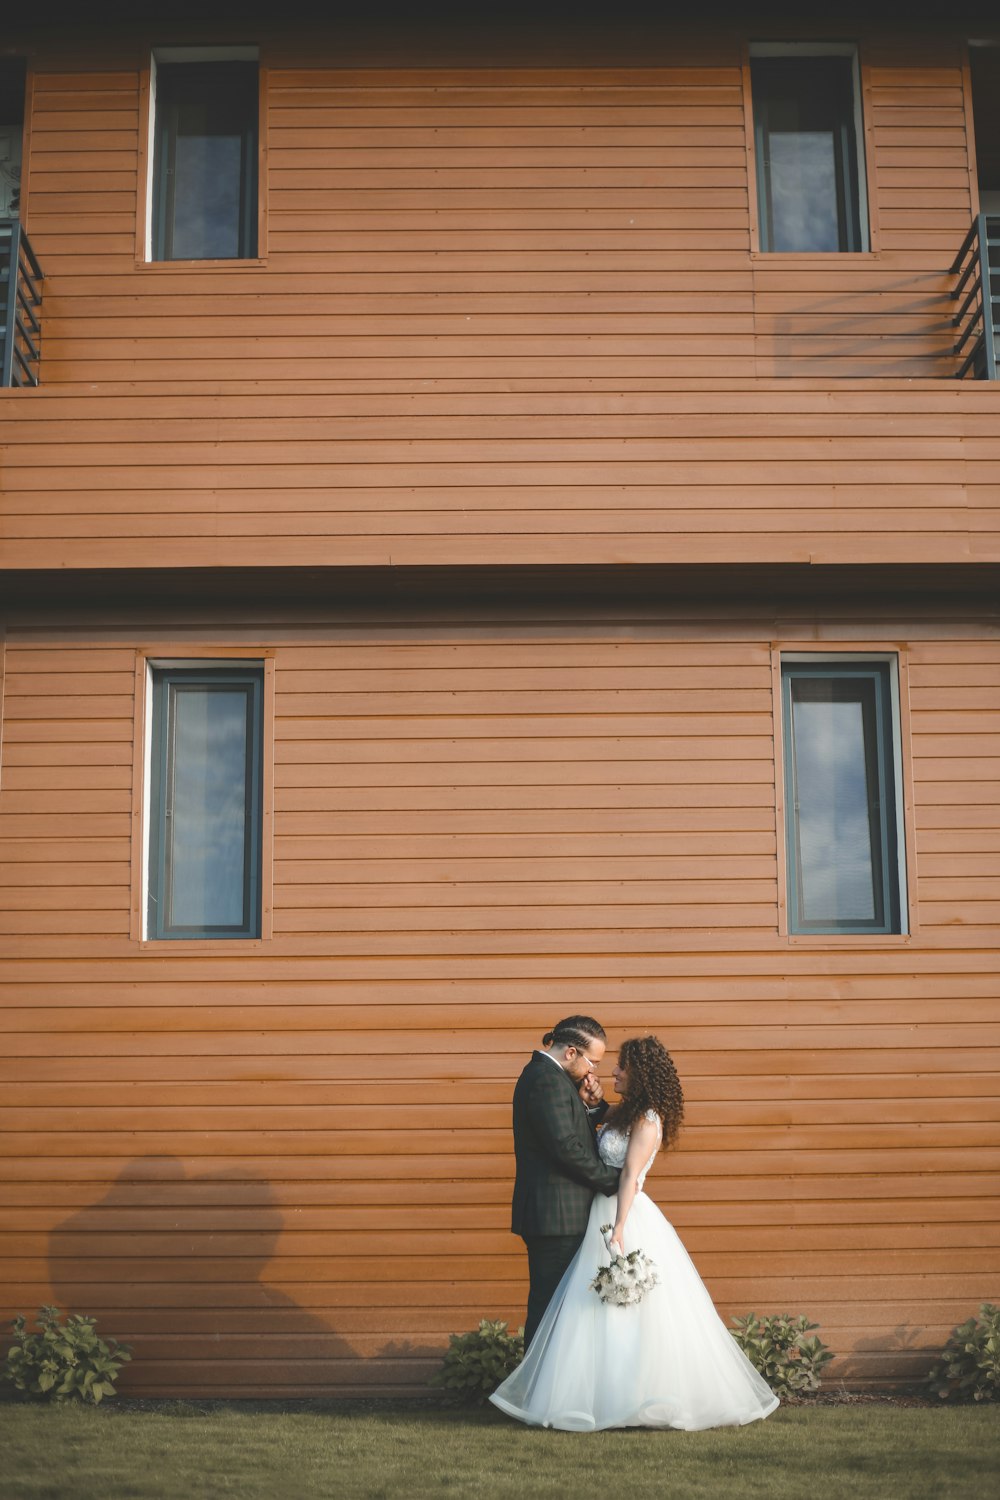 a man and woman kissing in front of a wooden building